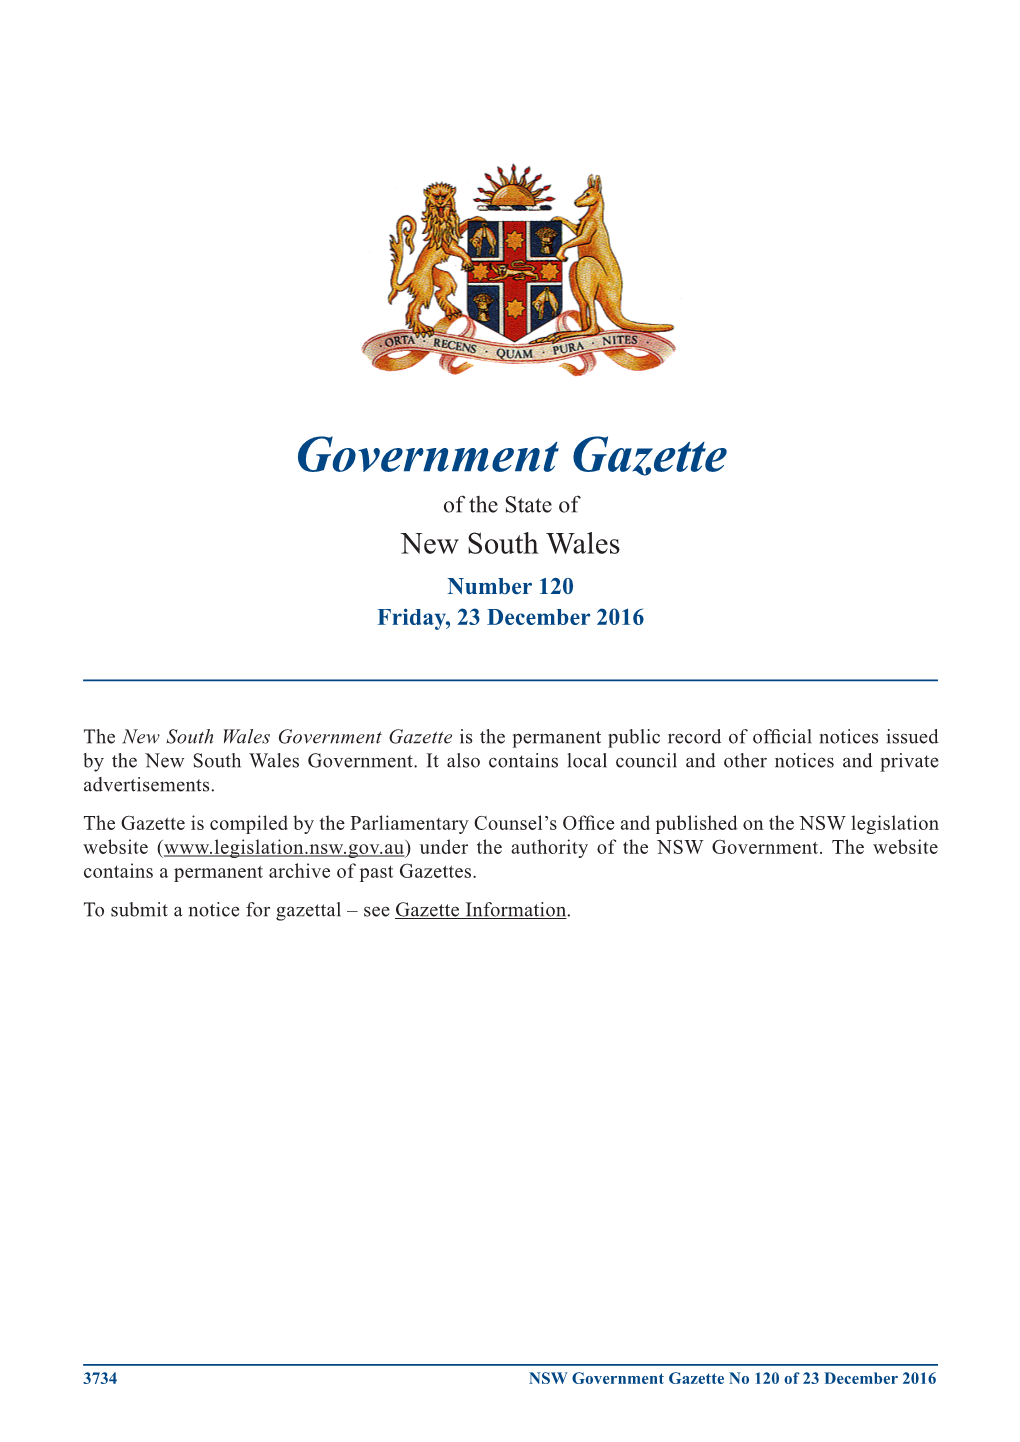 Government Gazette No 120 of 23 December 2016 Government Notices GOVERNMENT NOTICES Planning and Environment Notices